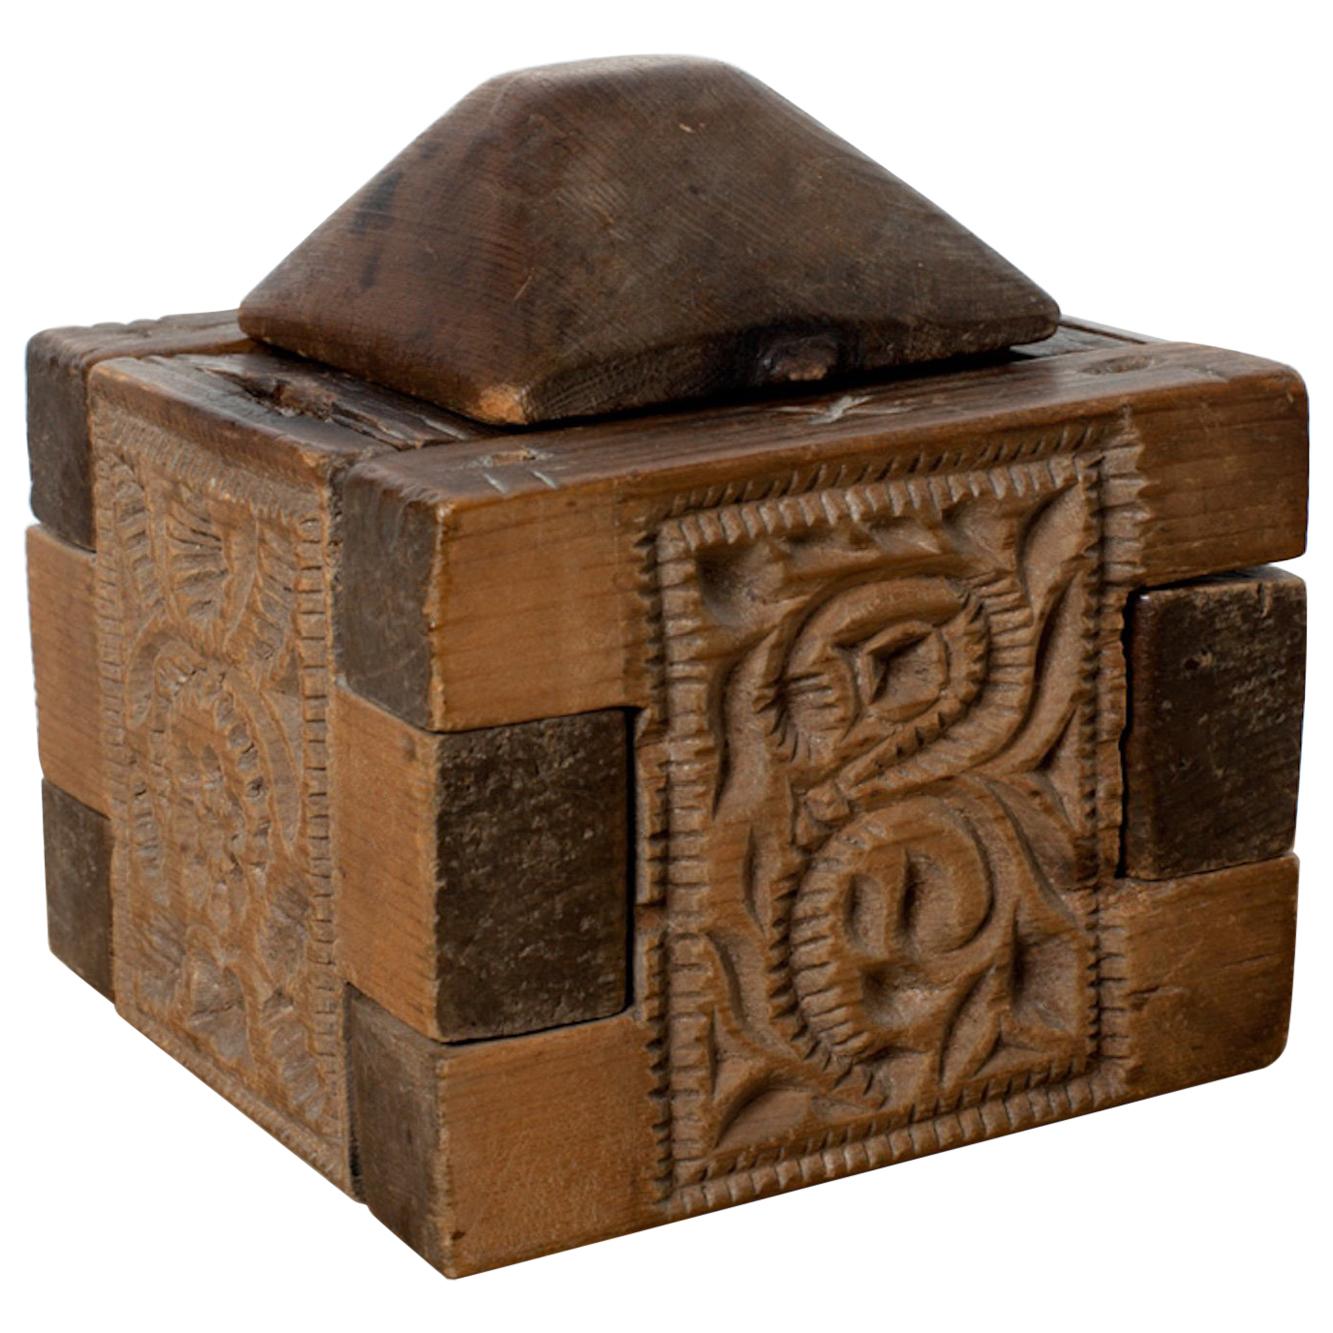 18th Century Butter "Church" Box Carved with Unique Patterned Imprints, 1788